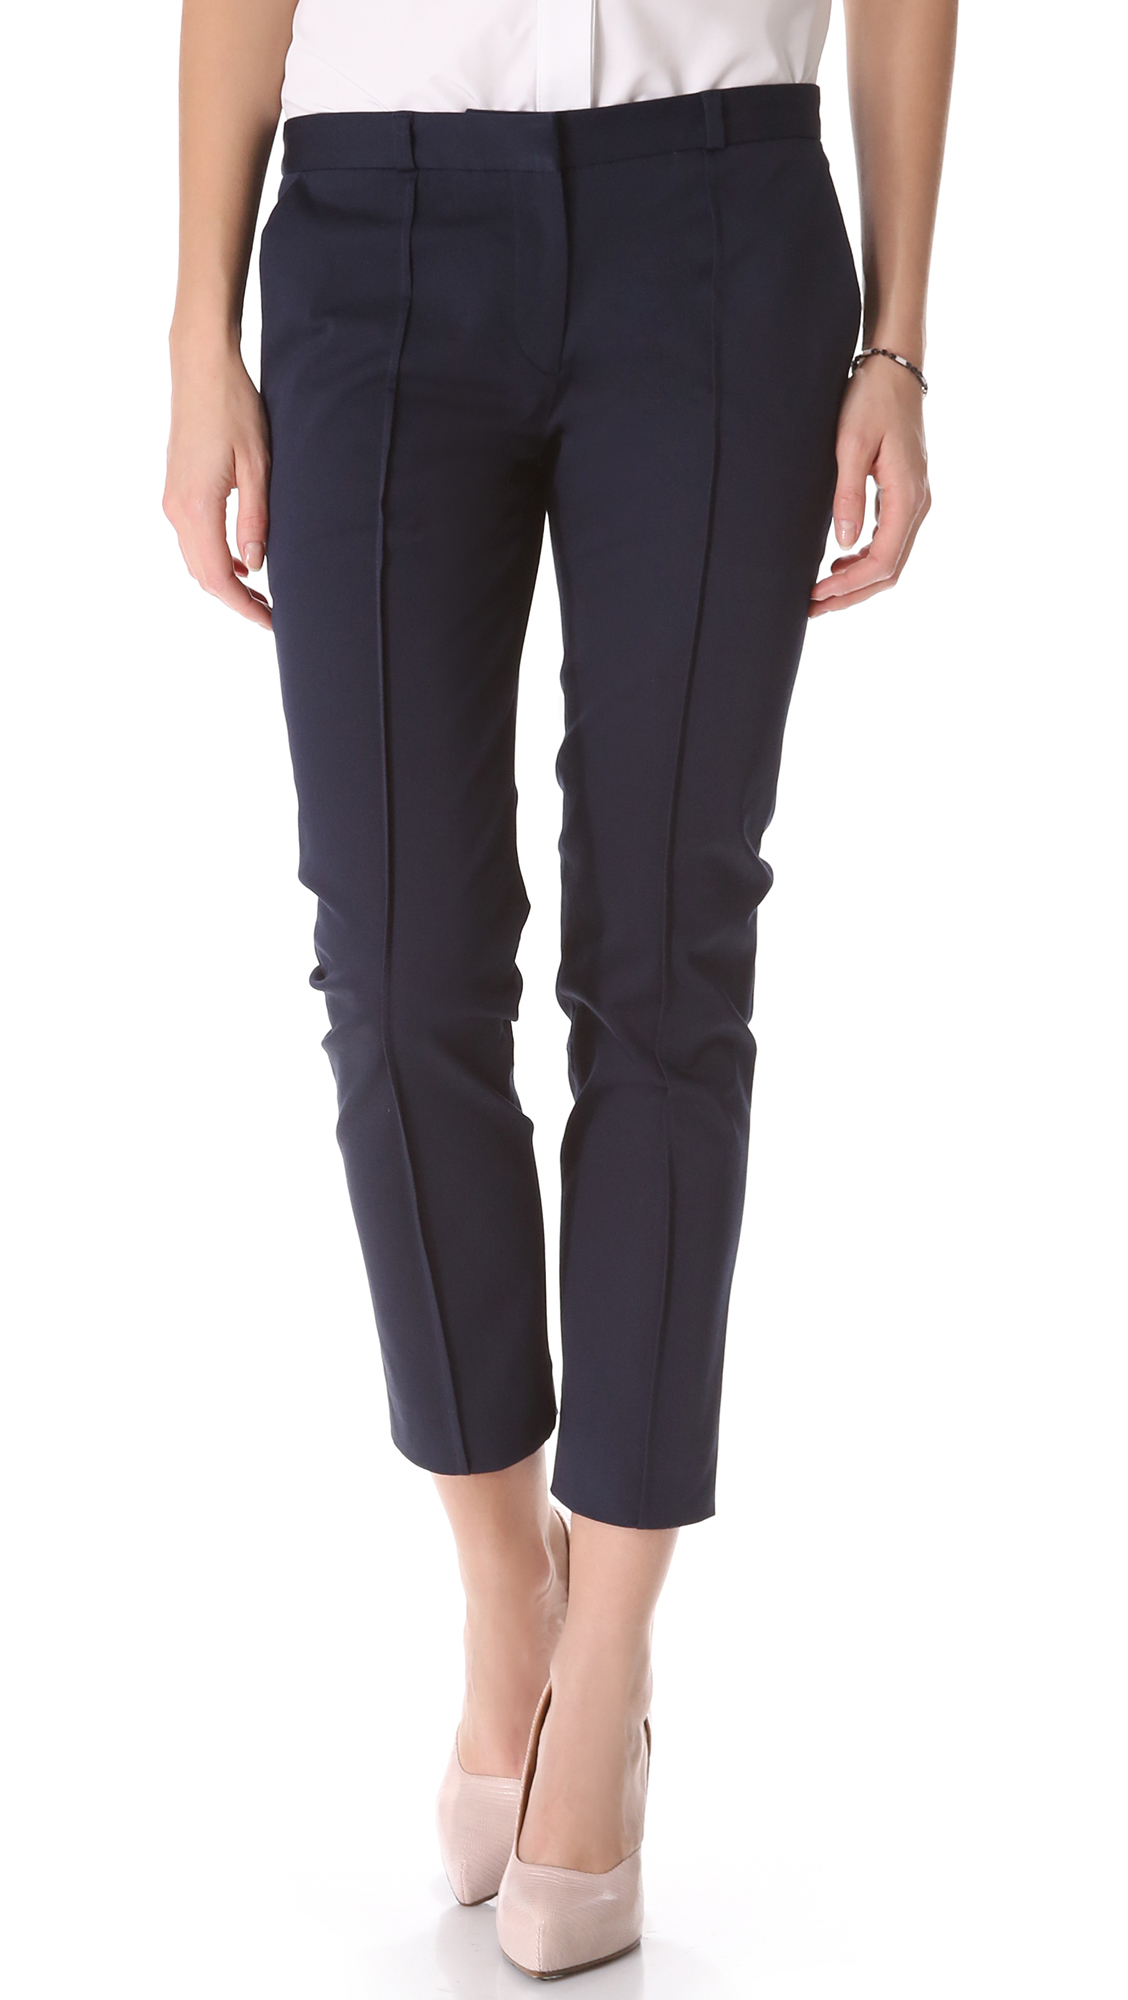 Lyst - Victoria Beckham Skinny Chino Pants - Navy Twill in Blue